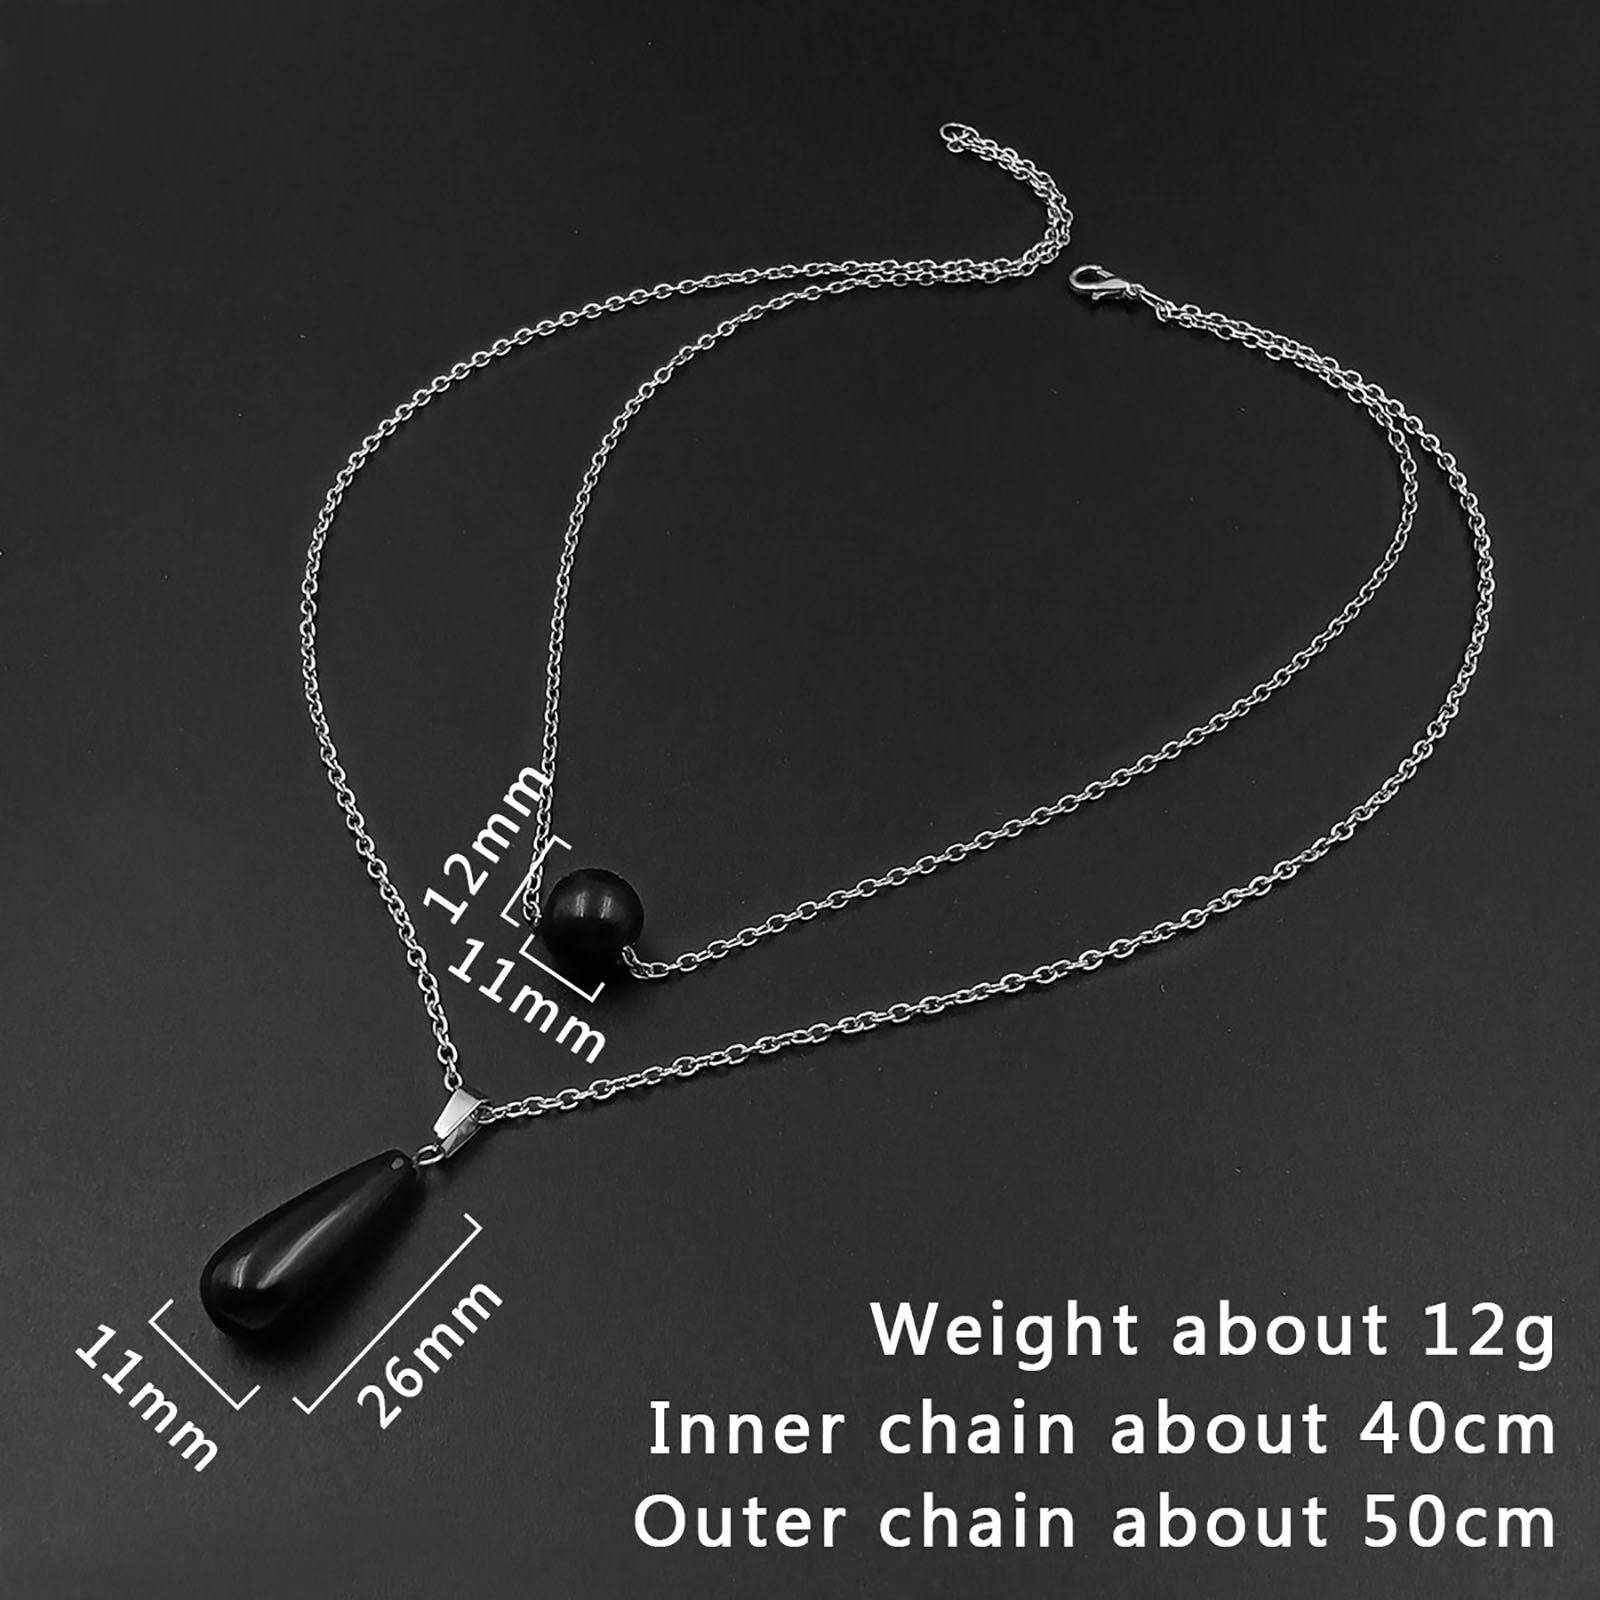 The water drop is about 11mm long, about 26mm high, about 12mm for beads, about 50cm for the outer chain, about 40cm for the inner chain